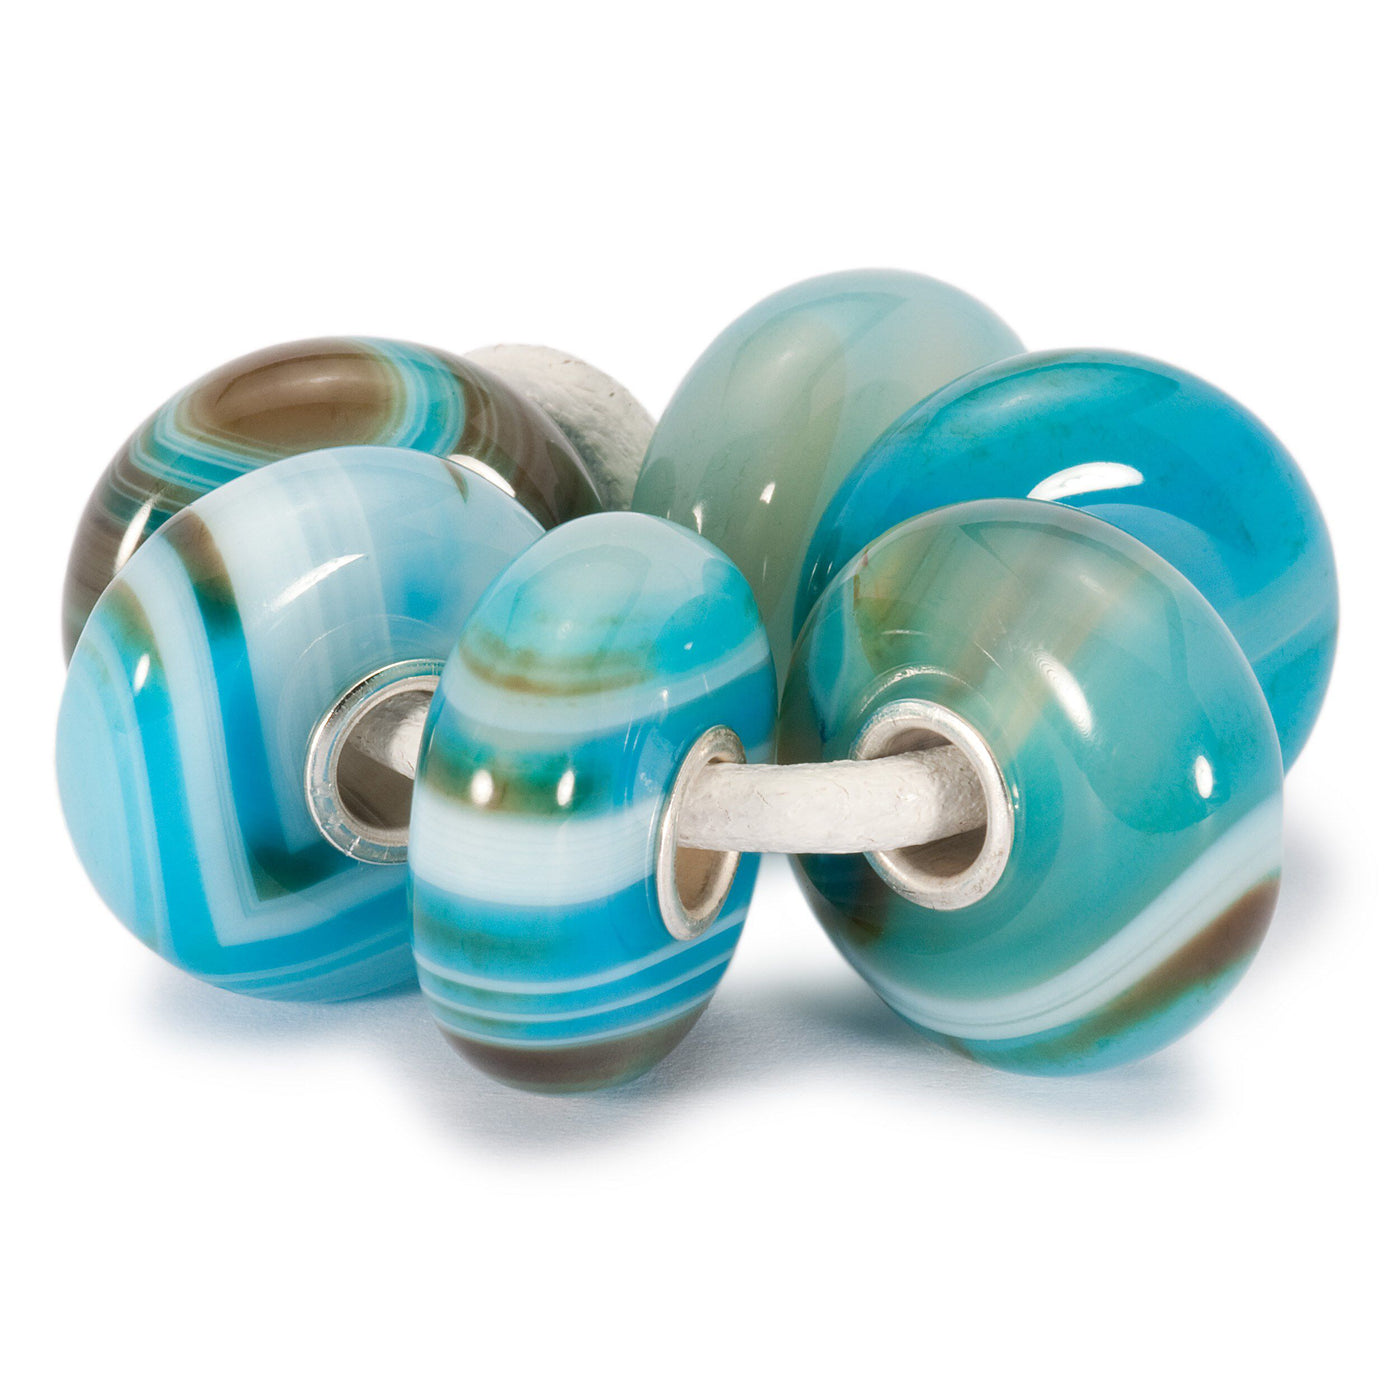 Turquoise Striped Agate Kit - Trollbeads Canada